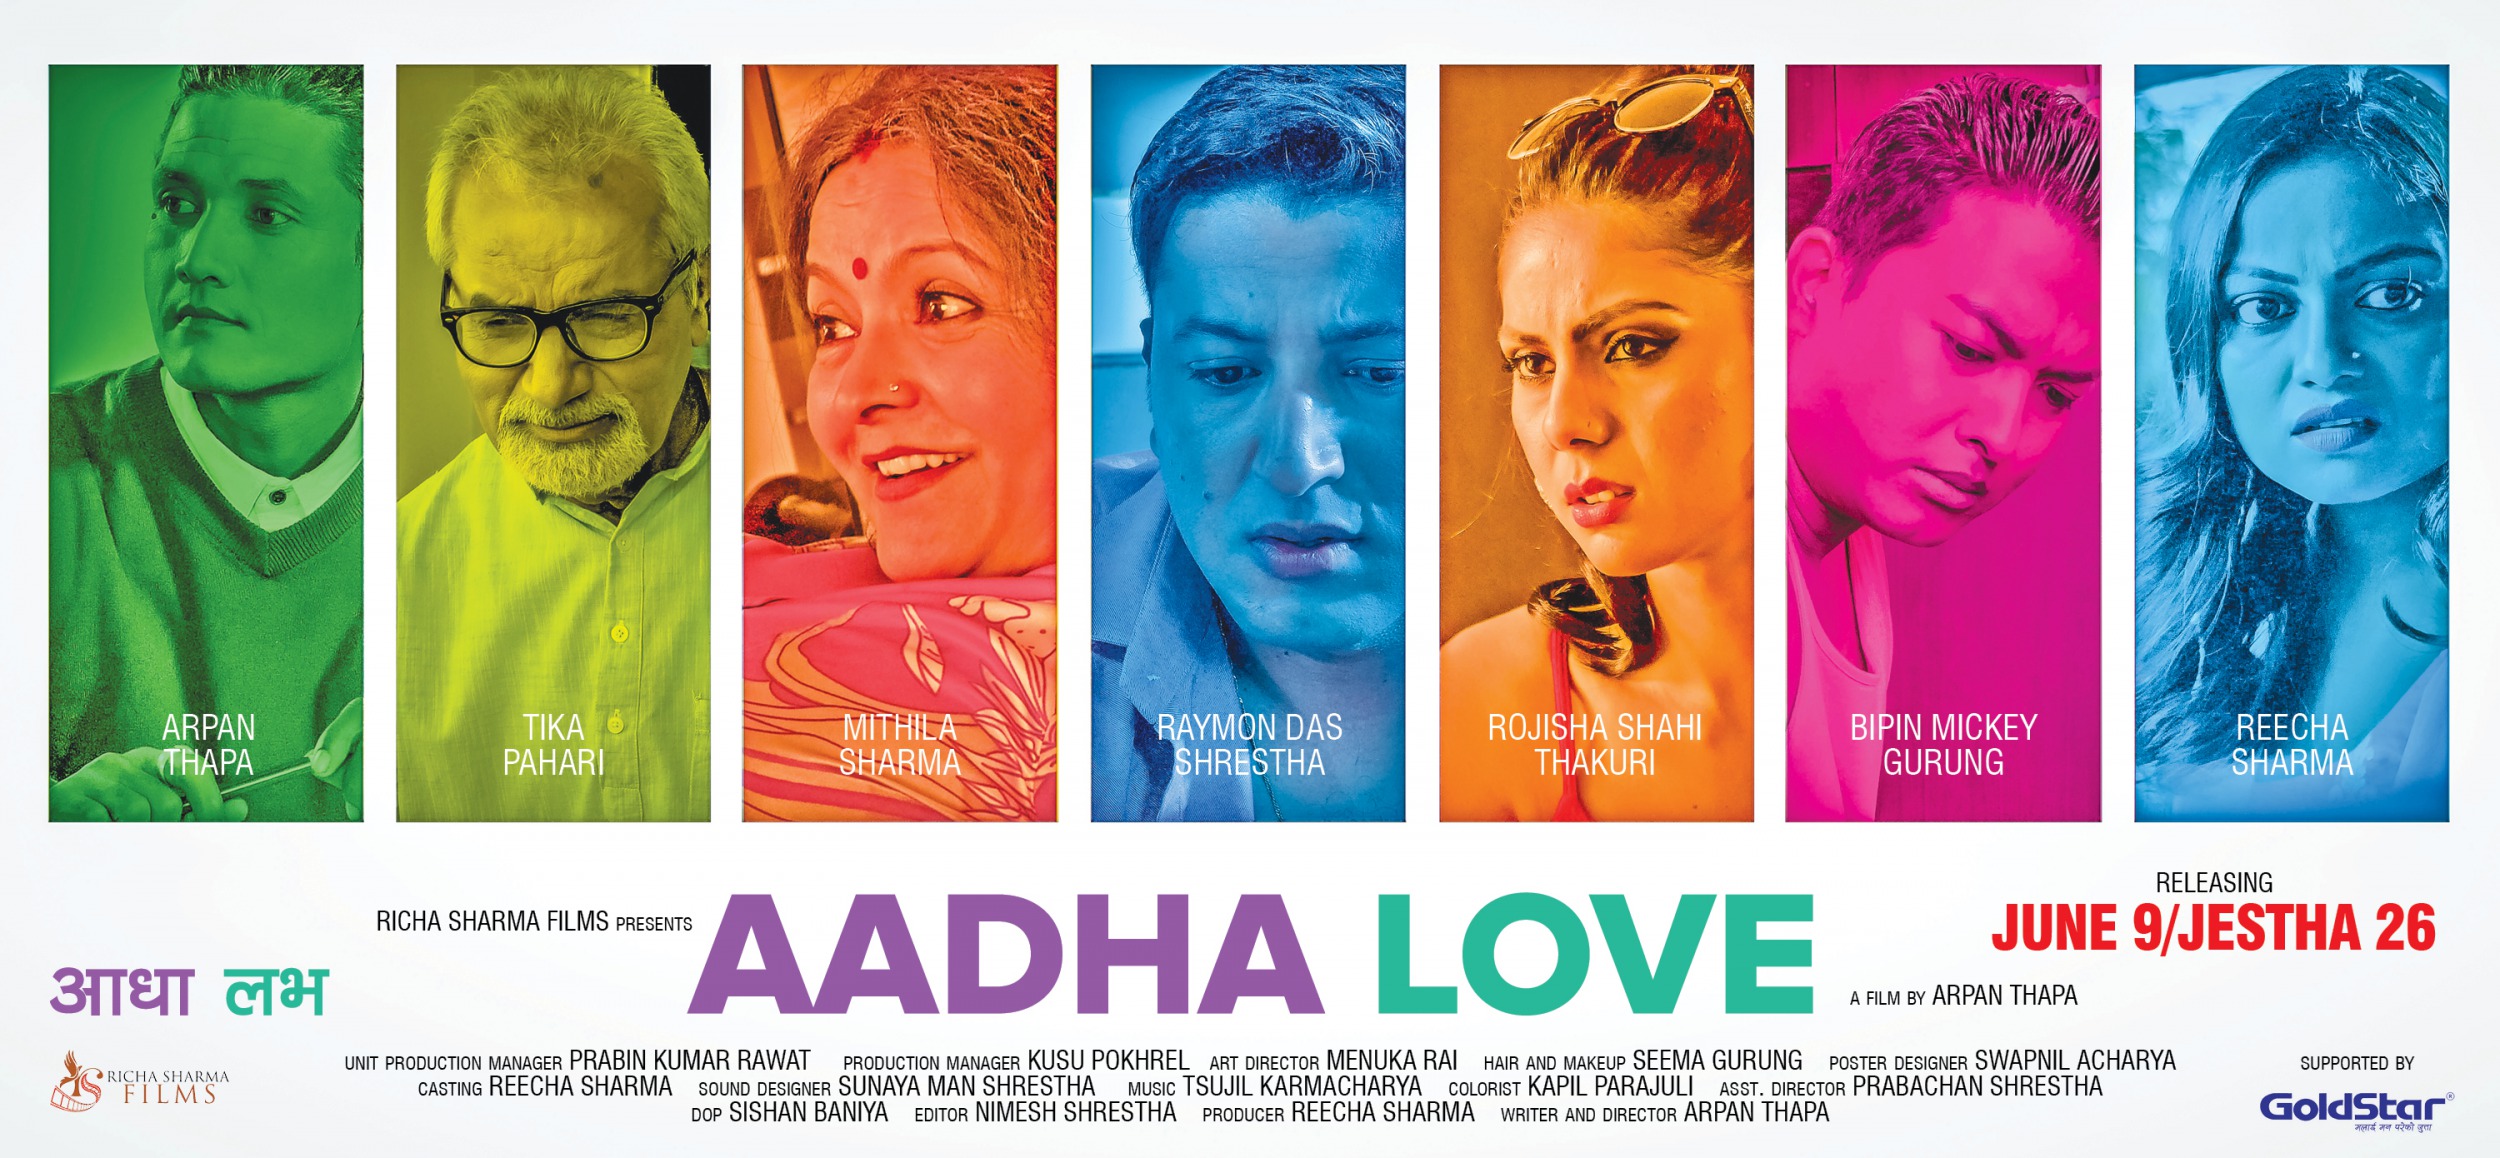 Mega Sized Movie Poster Image for Aadha Love (#2 of 4)